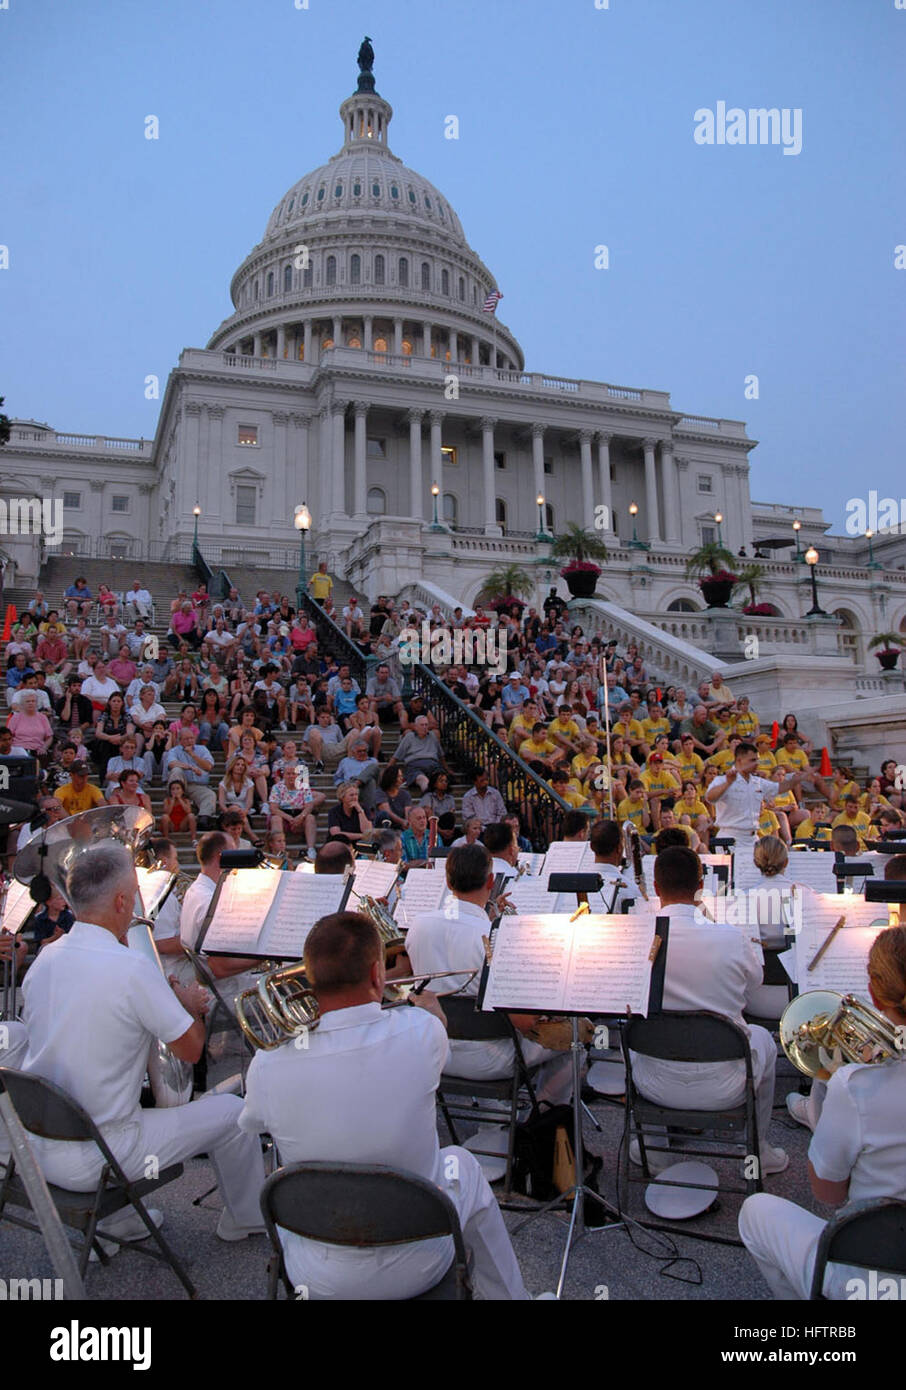 070618-N-7154R-008  WASHINGTON (June 18, 2007) The U.S. Navy Band performs a Monday evening concert June 7, 2007 on the West steps of the U.S. Capitol. The band is performing concerts at the Capitol on Monday evenings and  and at the Navy Memorial on Tuesday evenings through the end of August 2008. U.S. Navy photo by Joanna Romansic (Released) US Navy 070618-N-7154R-008 The U.S. Navy Band performs a Monday evening concert June 7, 2007 on the West steps of the U.S. Capitol Stock Photo